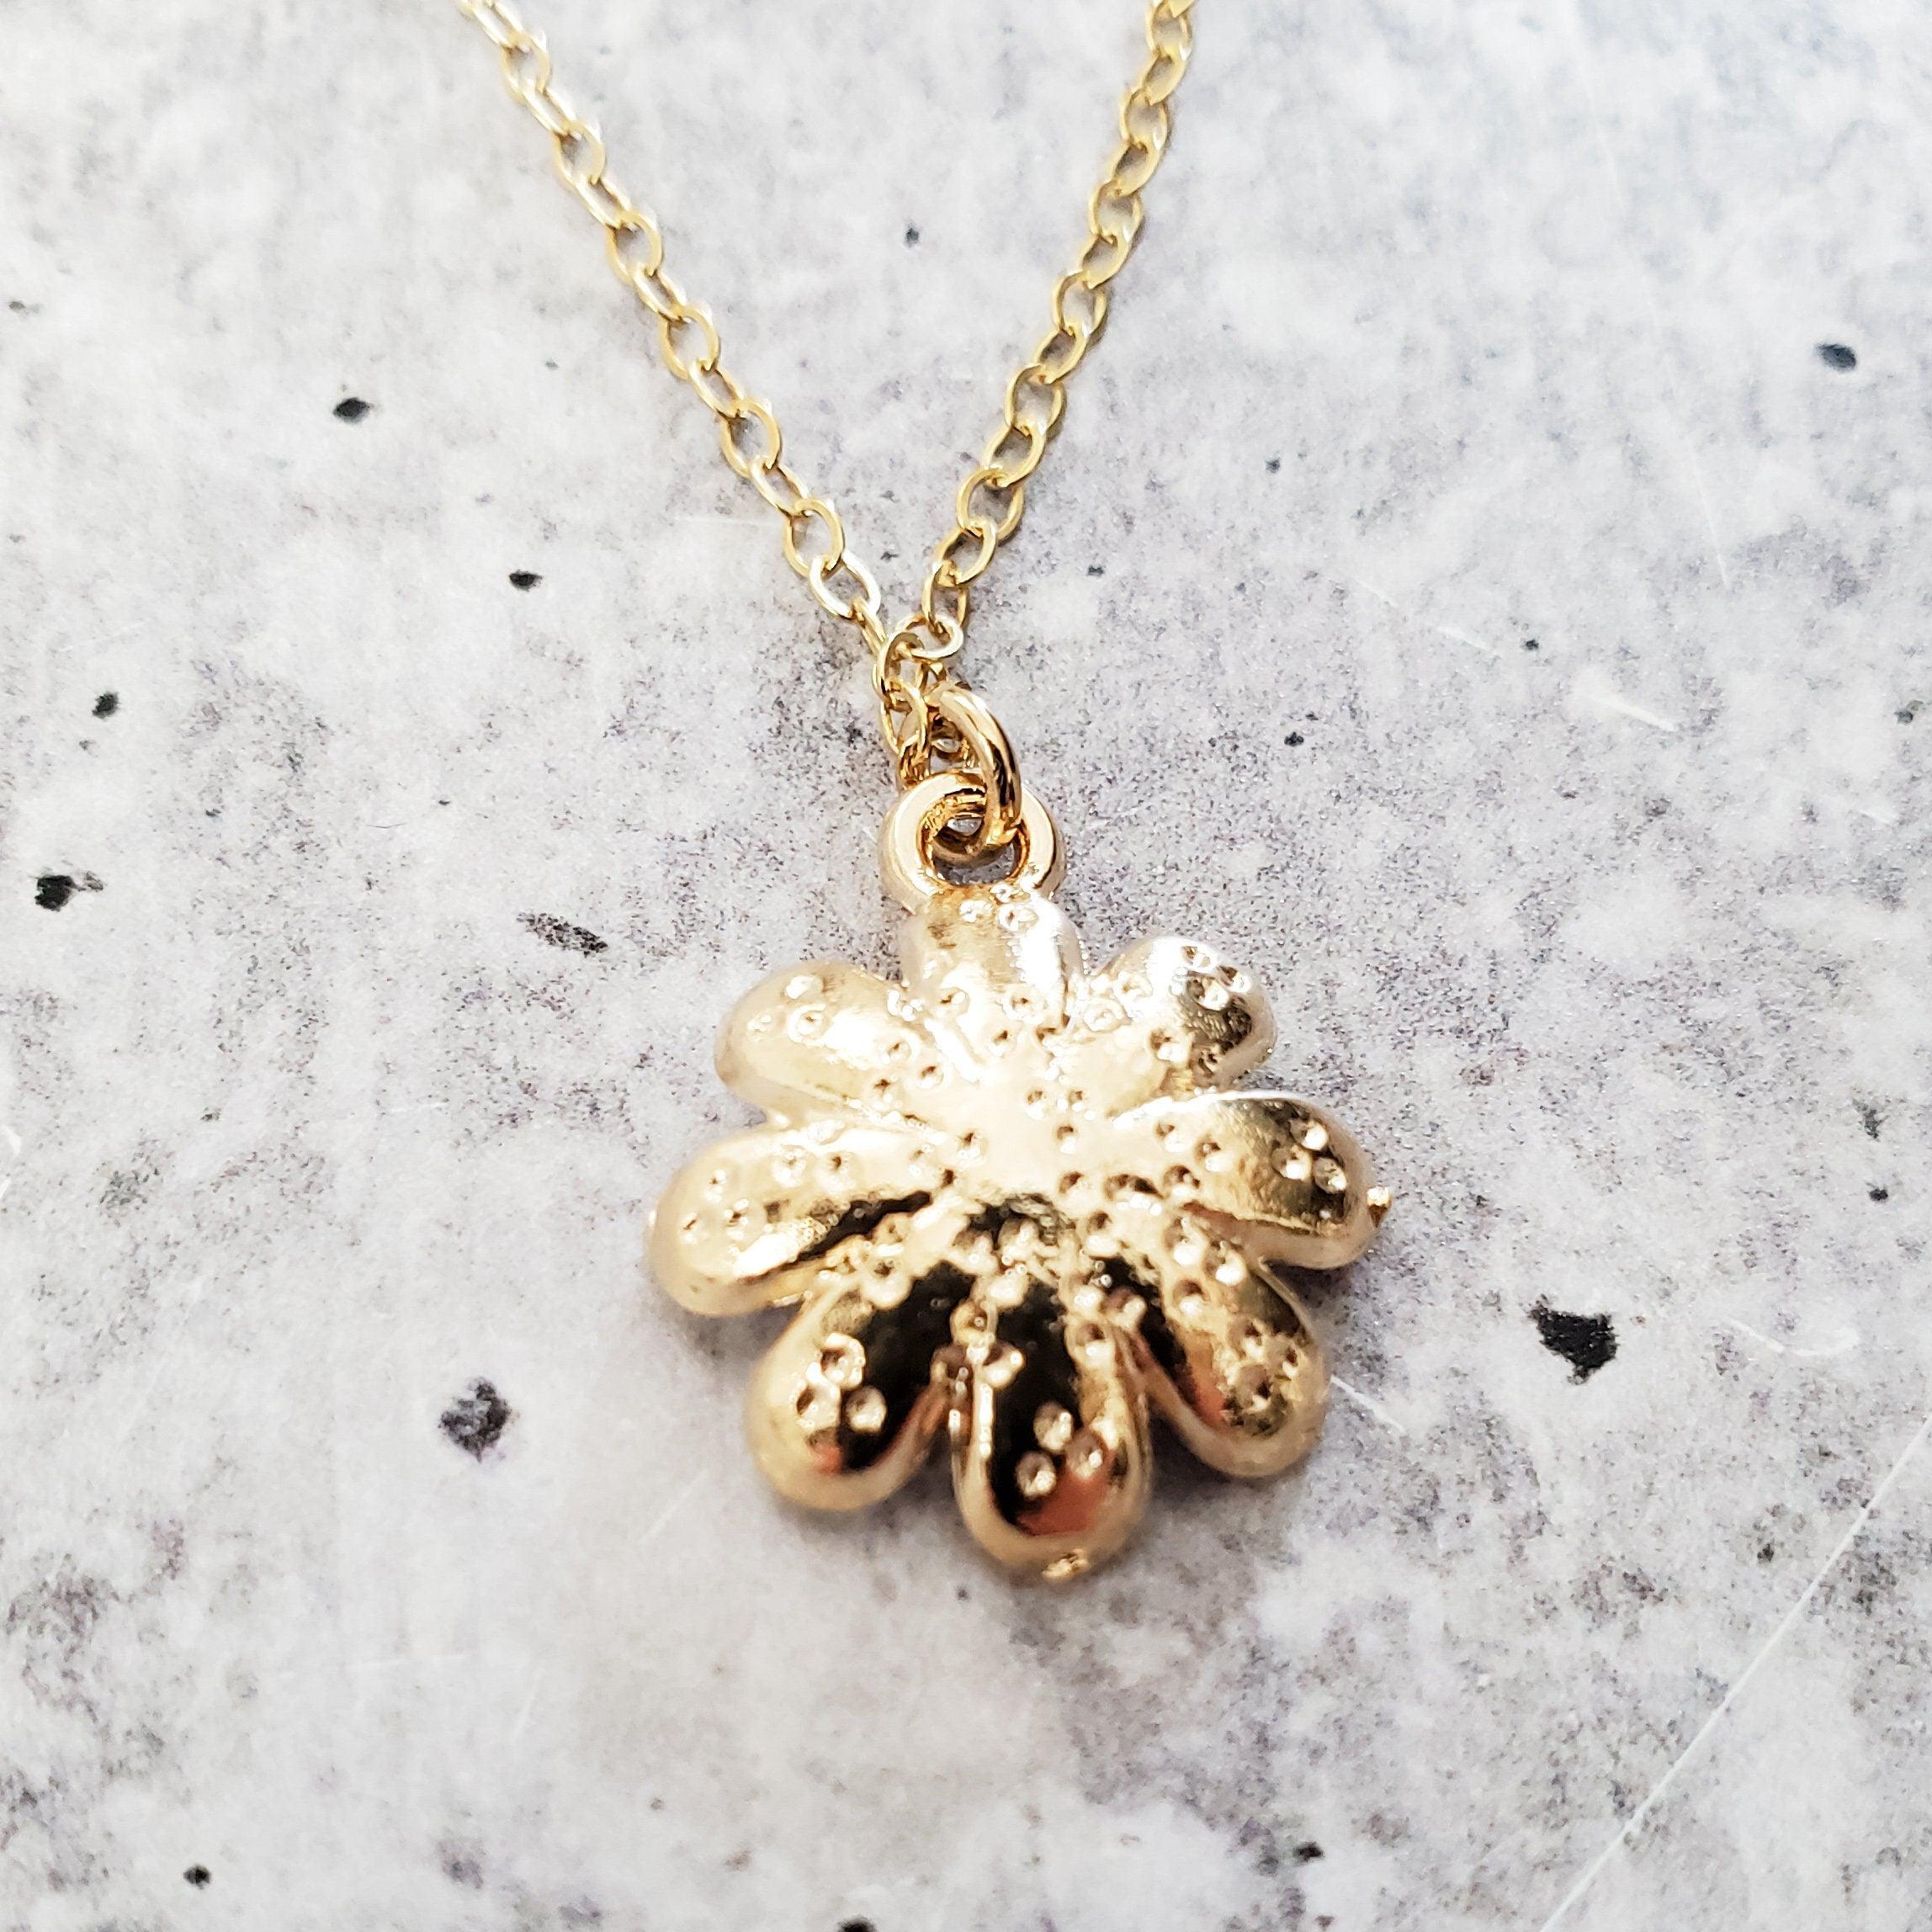 Gold Daisy Necklace - Enamel Daisy Flower Pendant -  Cute Daisy Gift for Her - Gold Daisy Charm Pendant for Teen - Layering Necklace for Mom